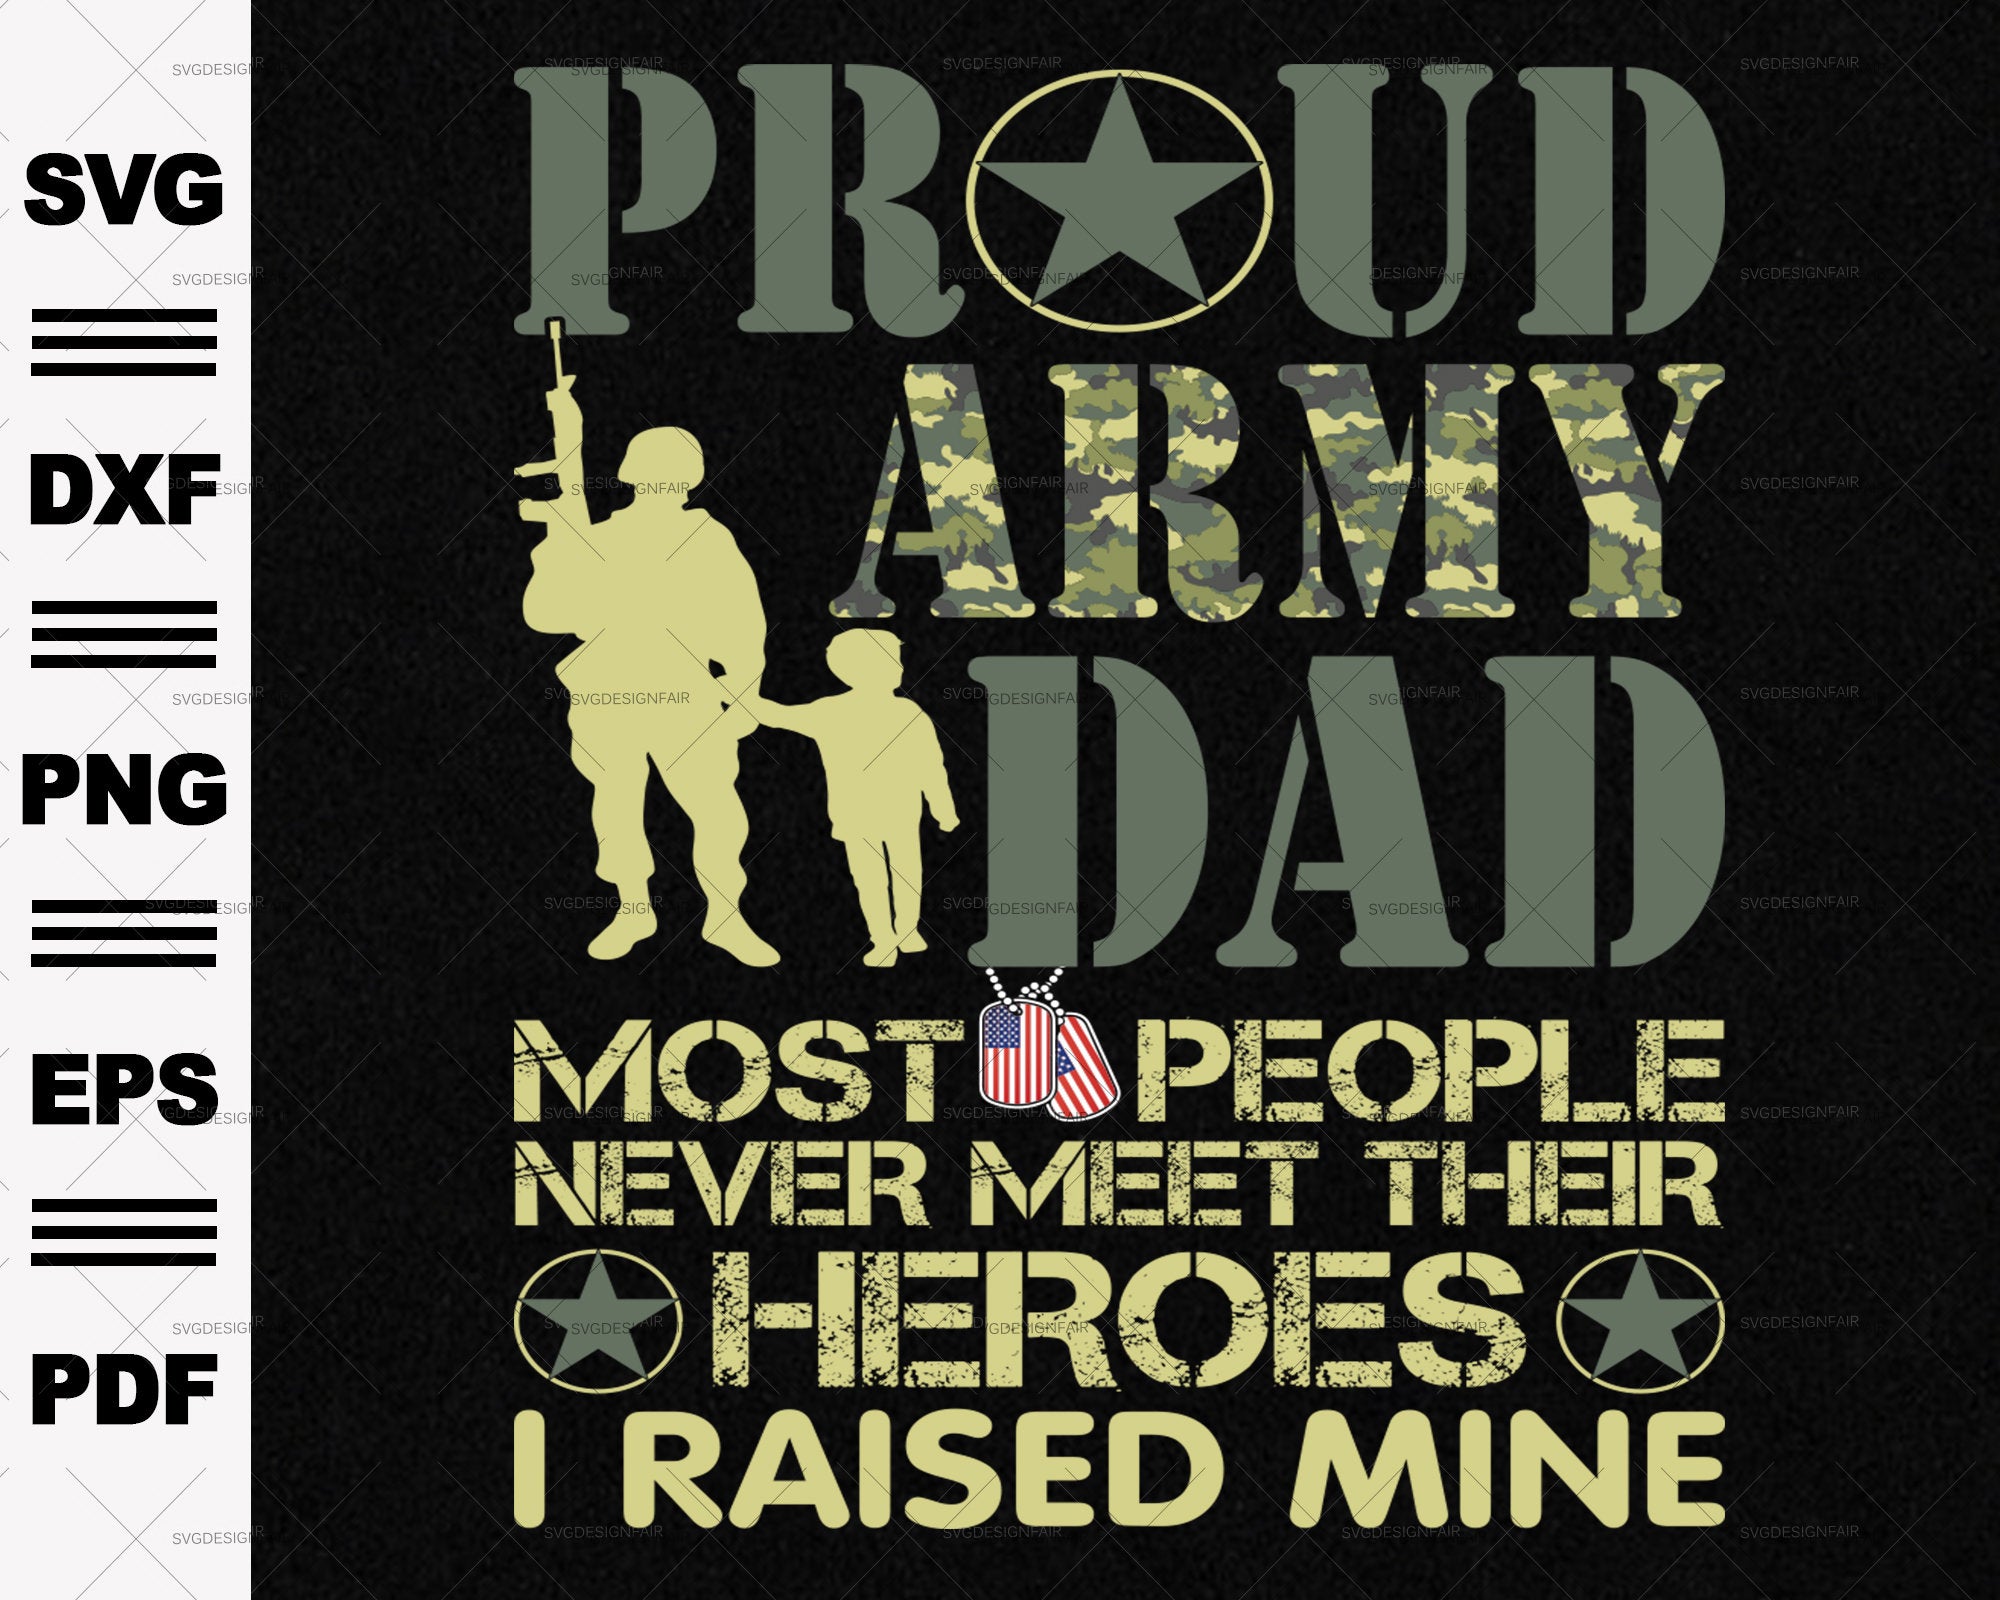 Download Svgdesignfair On Twitter Excited To Share The Latest Addition To My Etsy Shop Proud Army Dad Svg Cut File For Silhouette And Cricut Cutter Https T Co Vllr8nhyms Supplies Cardmakingstationery Proudarmydad Digitalfile Armysvg Armysymbols